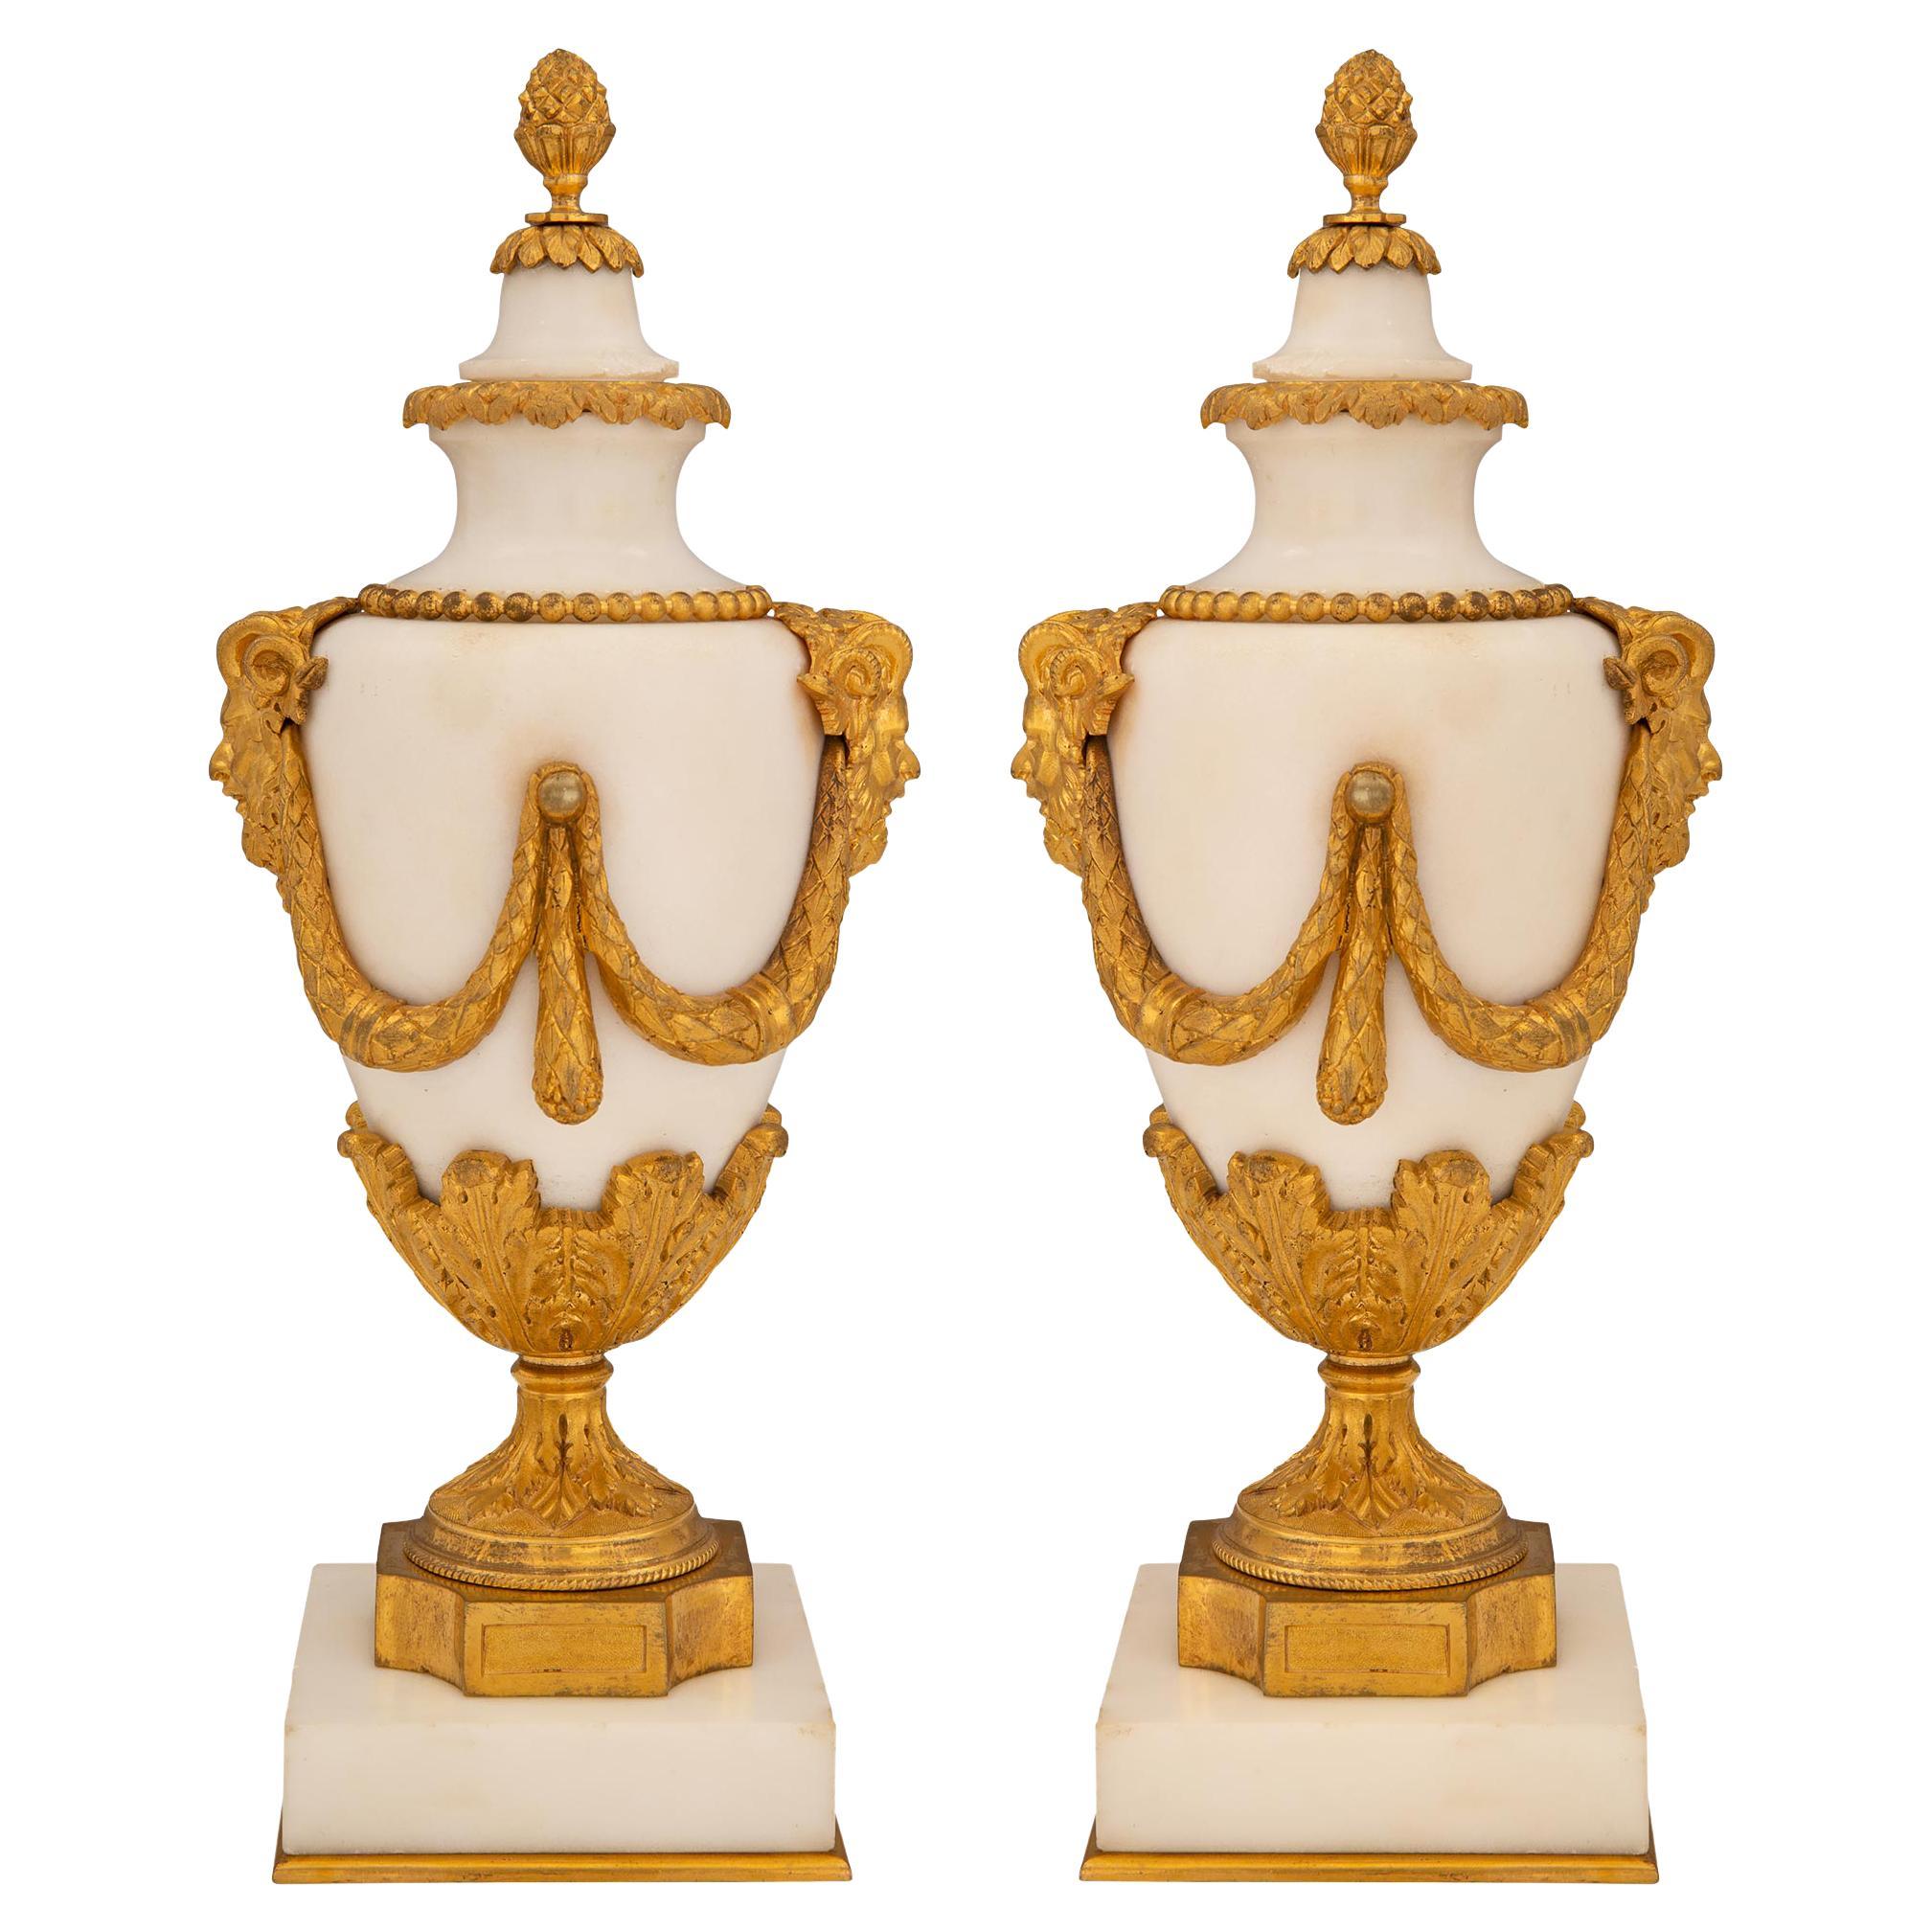 Pair of French 19th Century Louis XVI Style Marble and Ormolu Lidded Casolettes For Sale